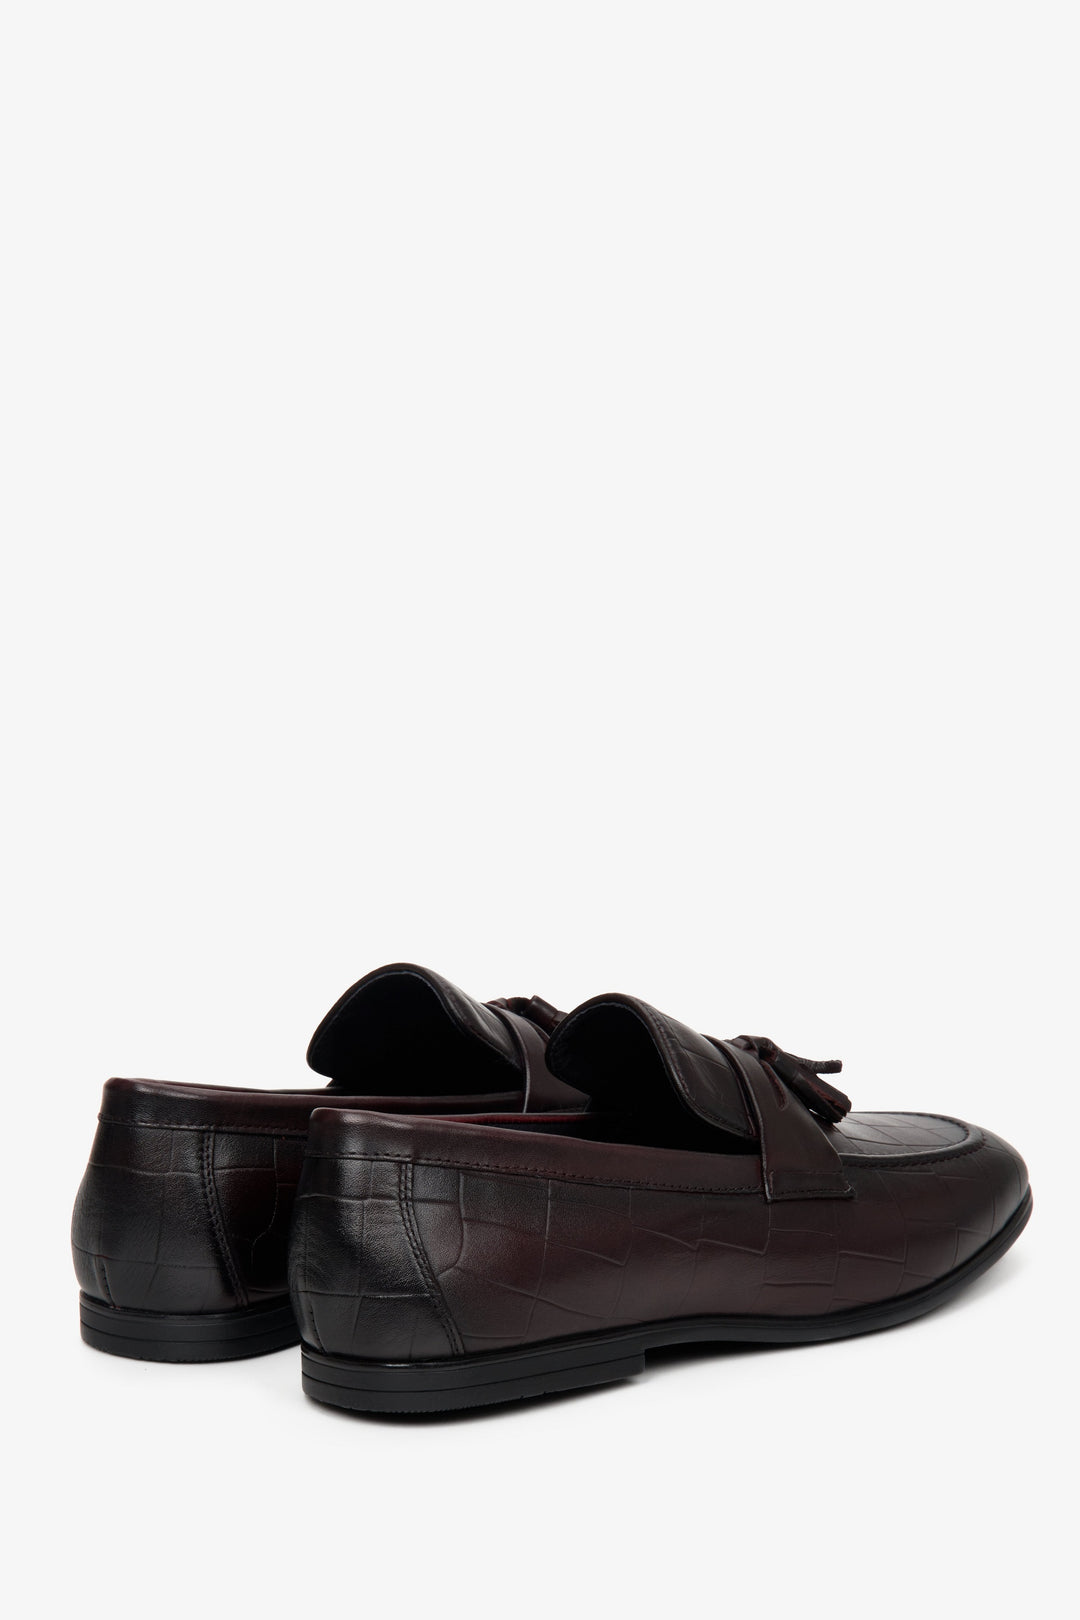 Men's brown loafers by Estro - close-up of the heel and the side of the shoe.